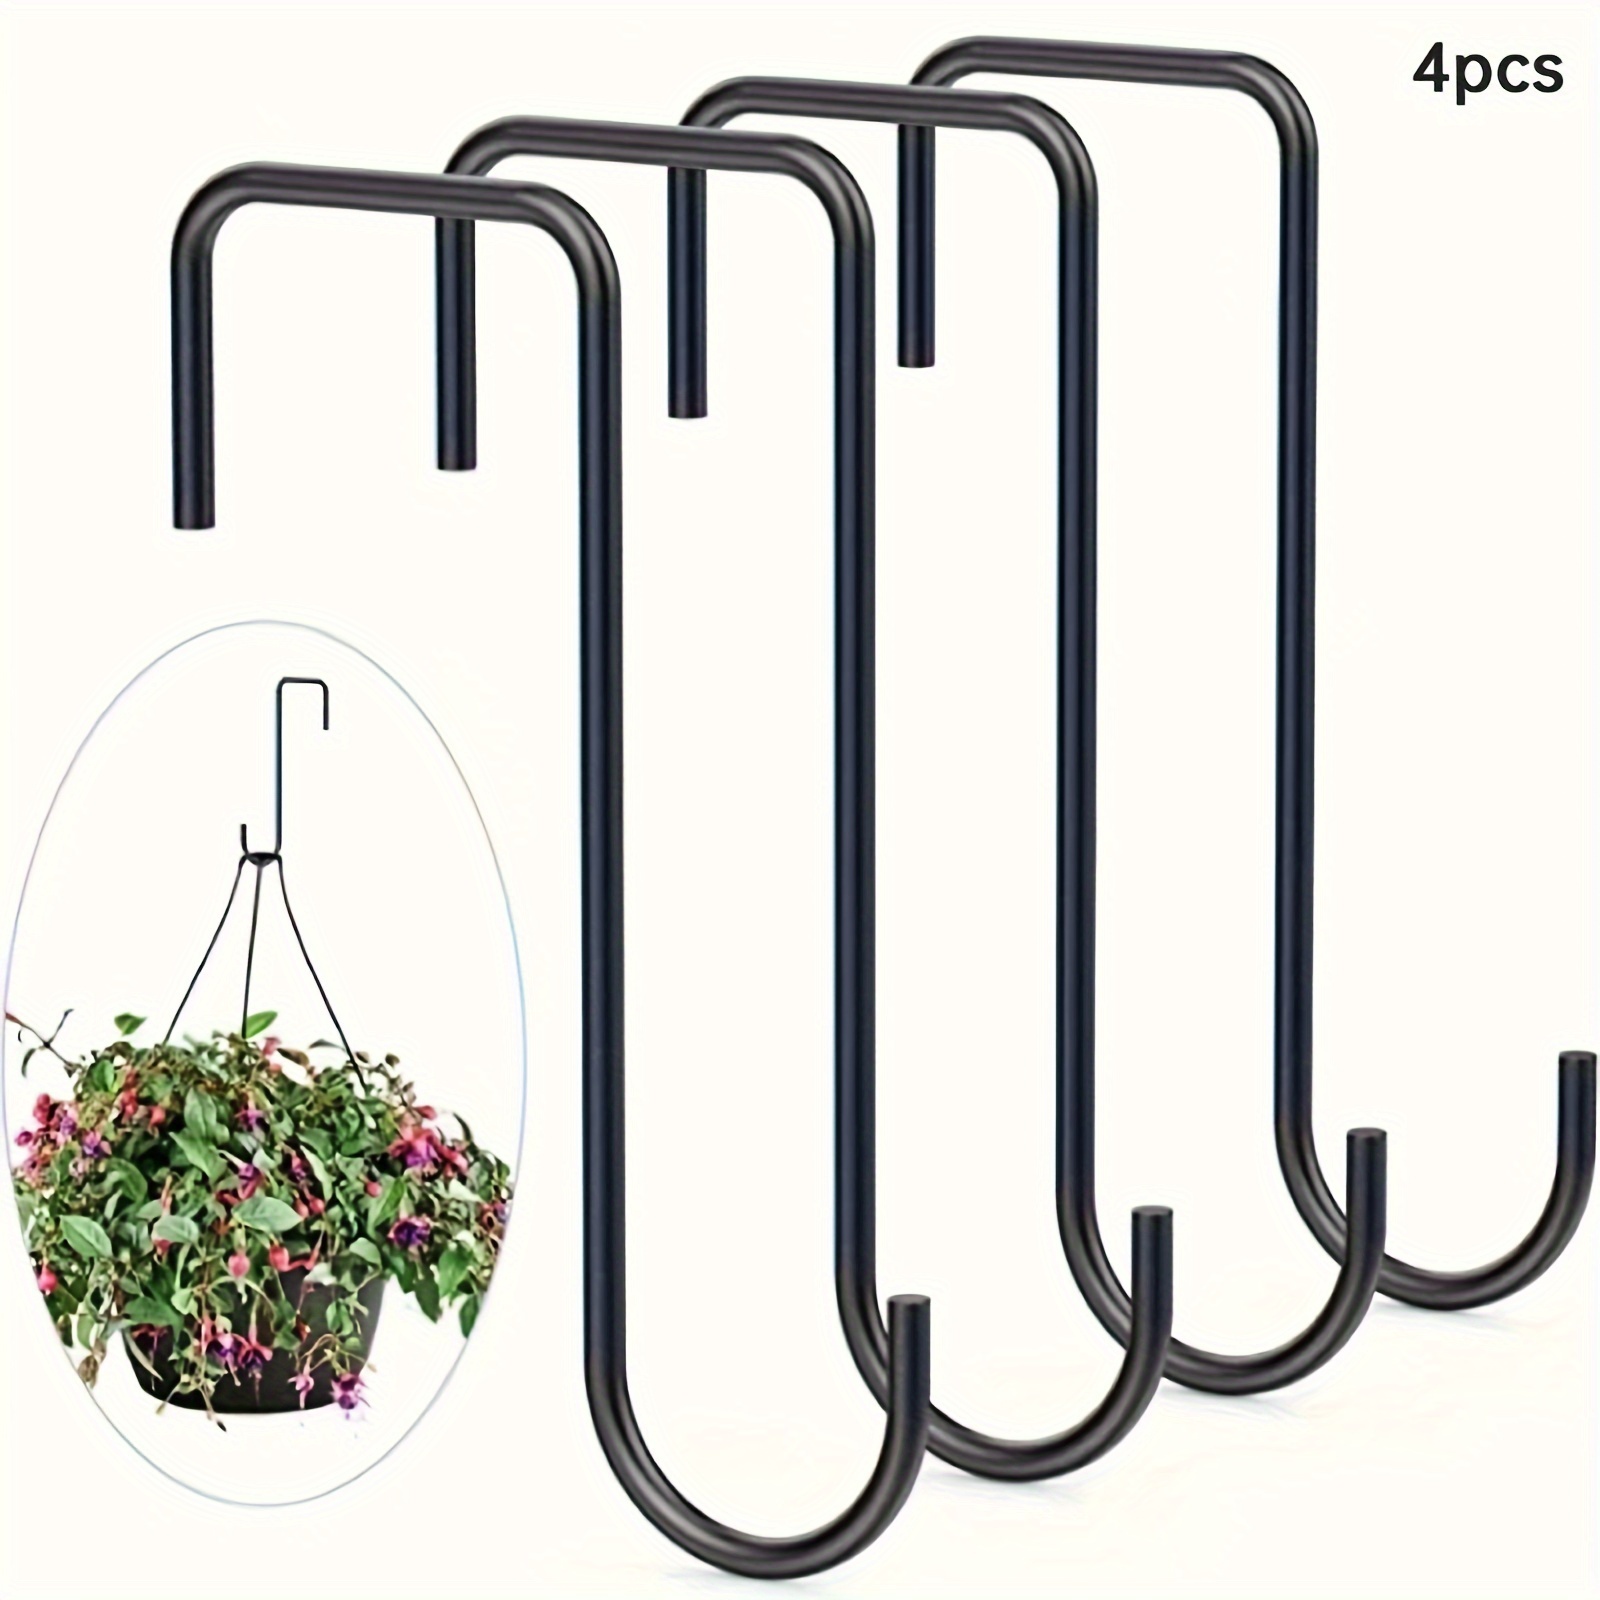 4pcs Fence Hooks Robust Door Hangers Made Of Stainless Steel For